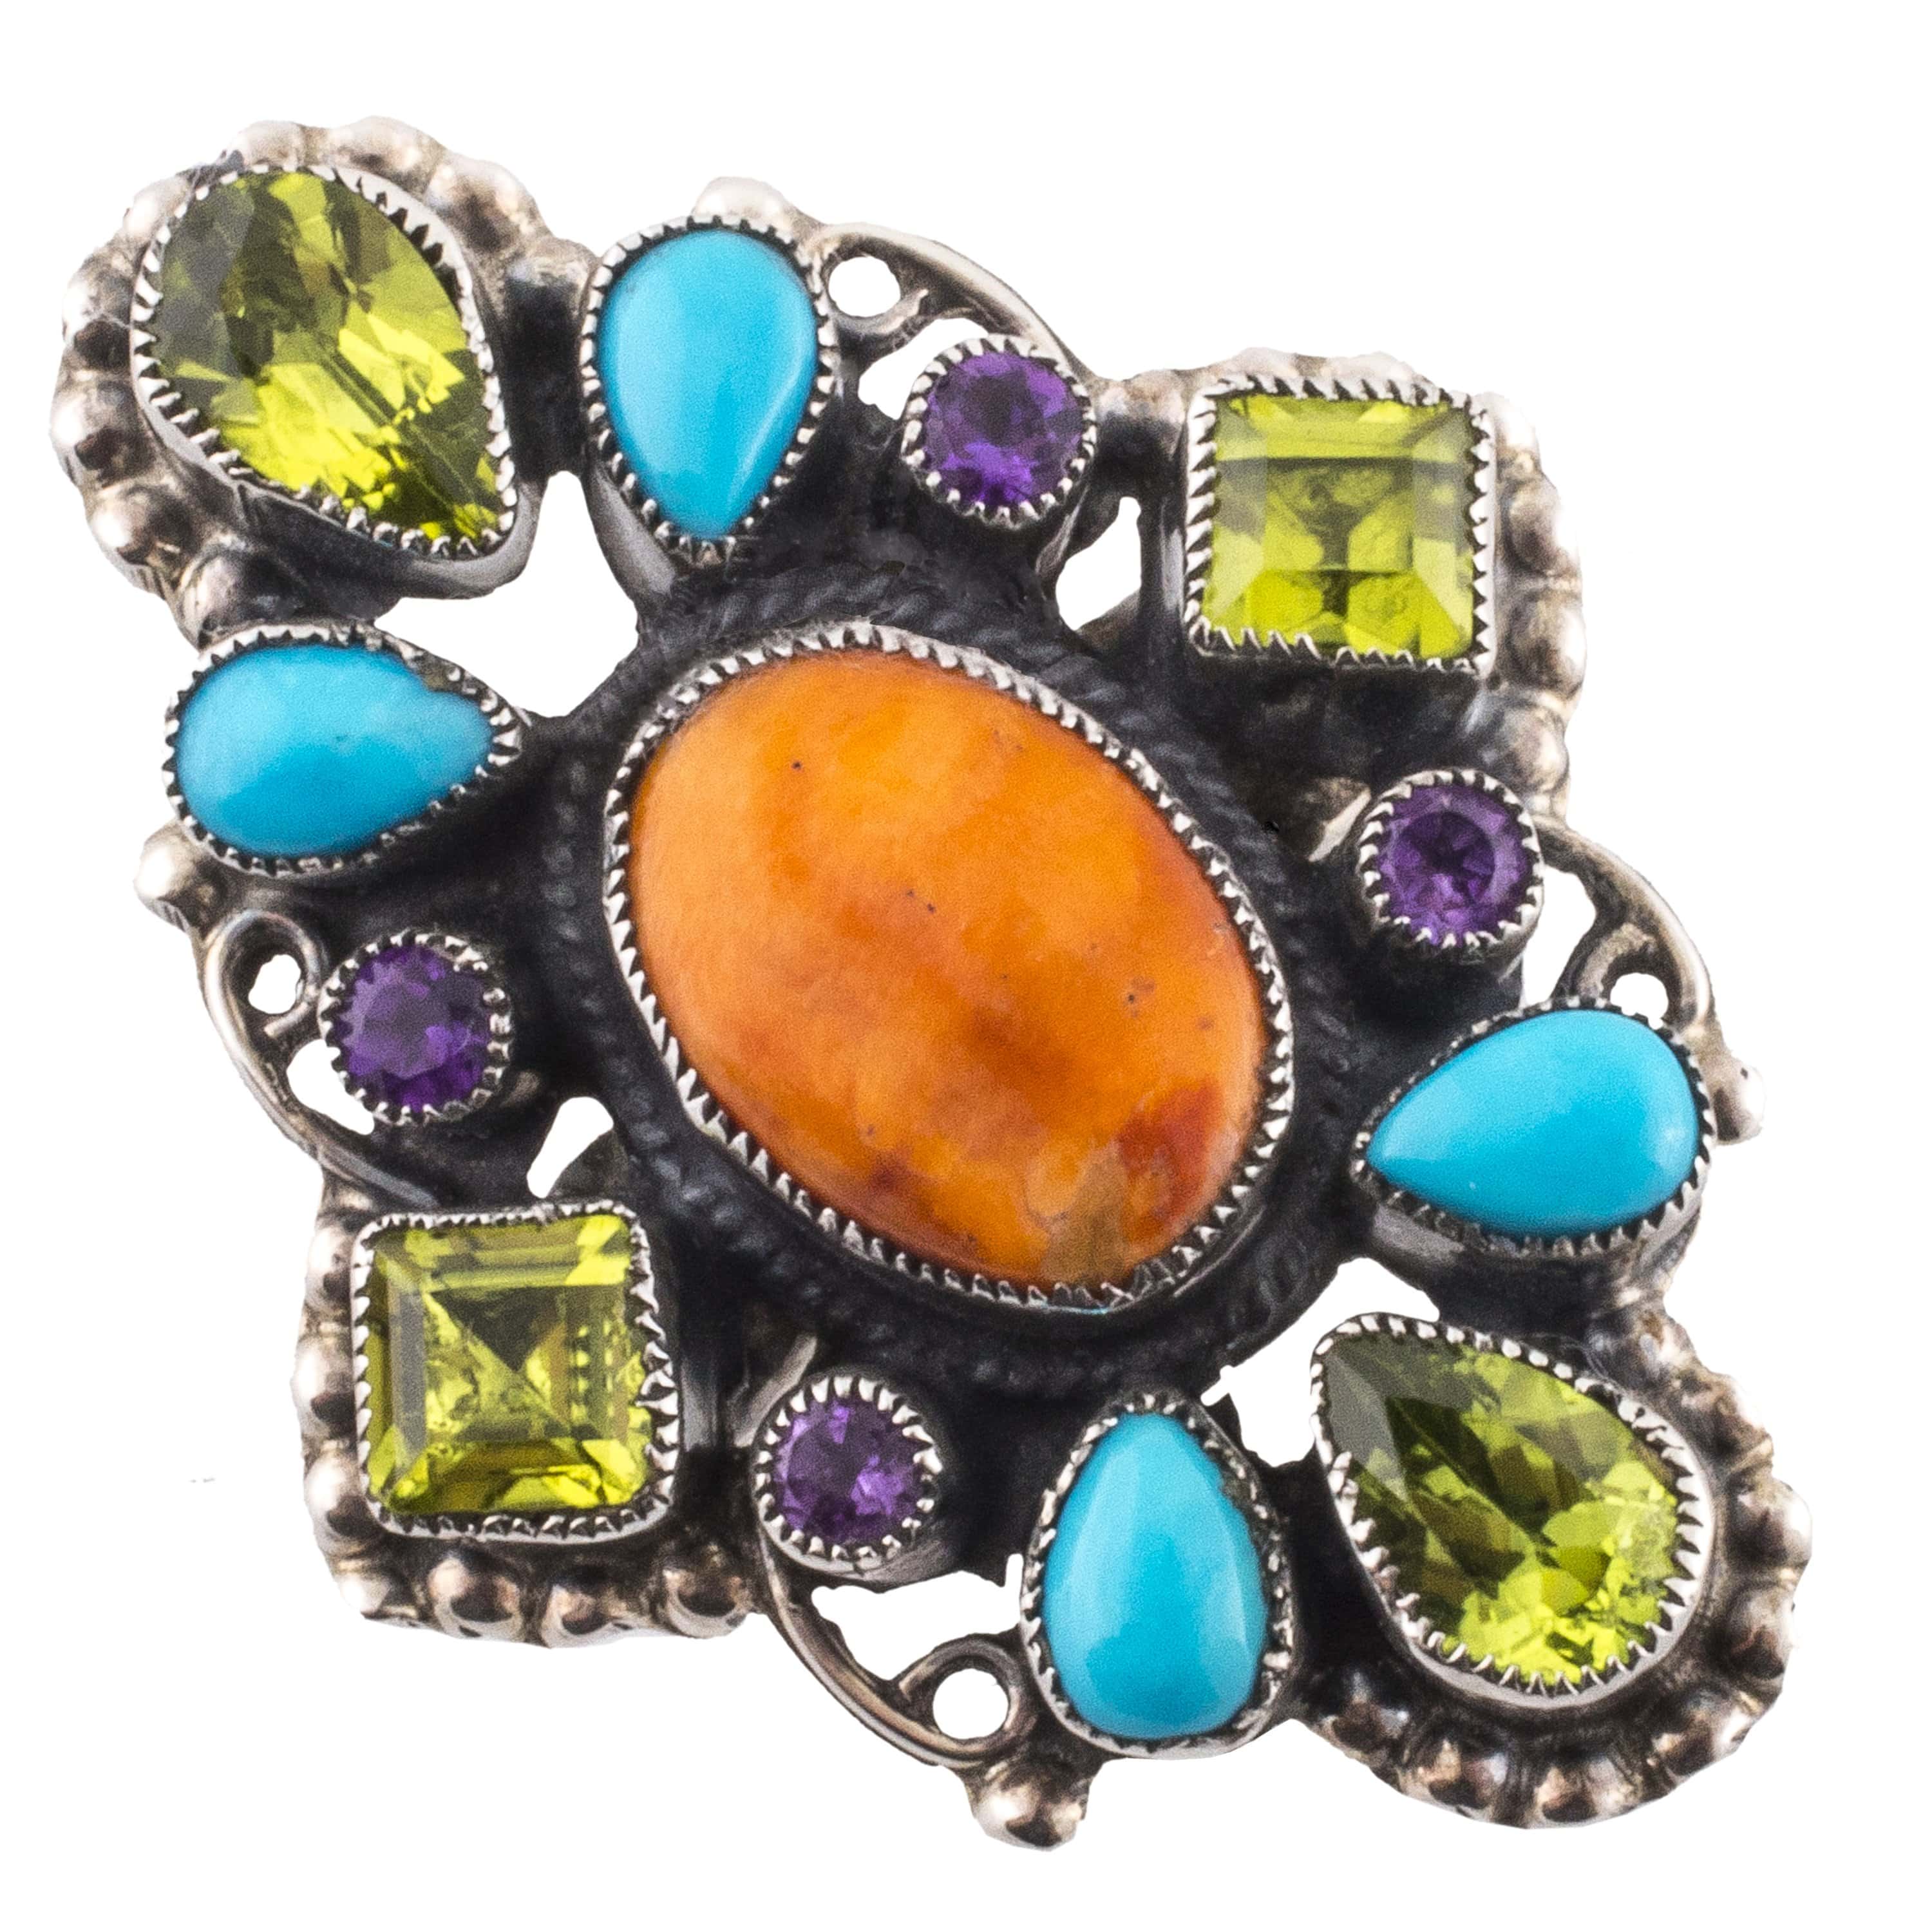 Kalifano Native American Jewelry 8.5 Leo Feeney Sleeping Beauty Turquoise, Spiny Oyster Shell , Amethyst, and Peridot USA Native American Made 925 Sterling Silver Ring NAR1500.010.85